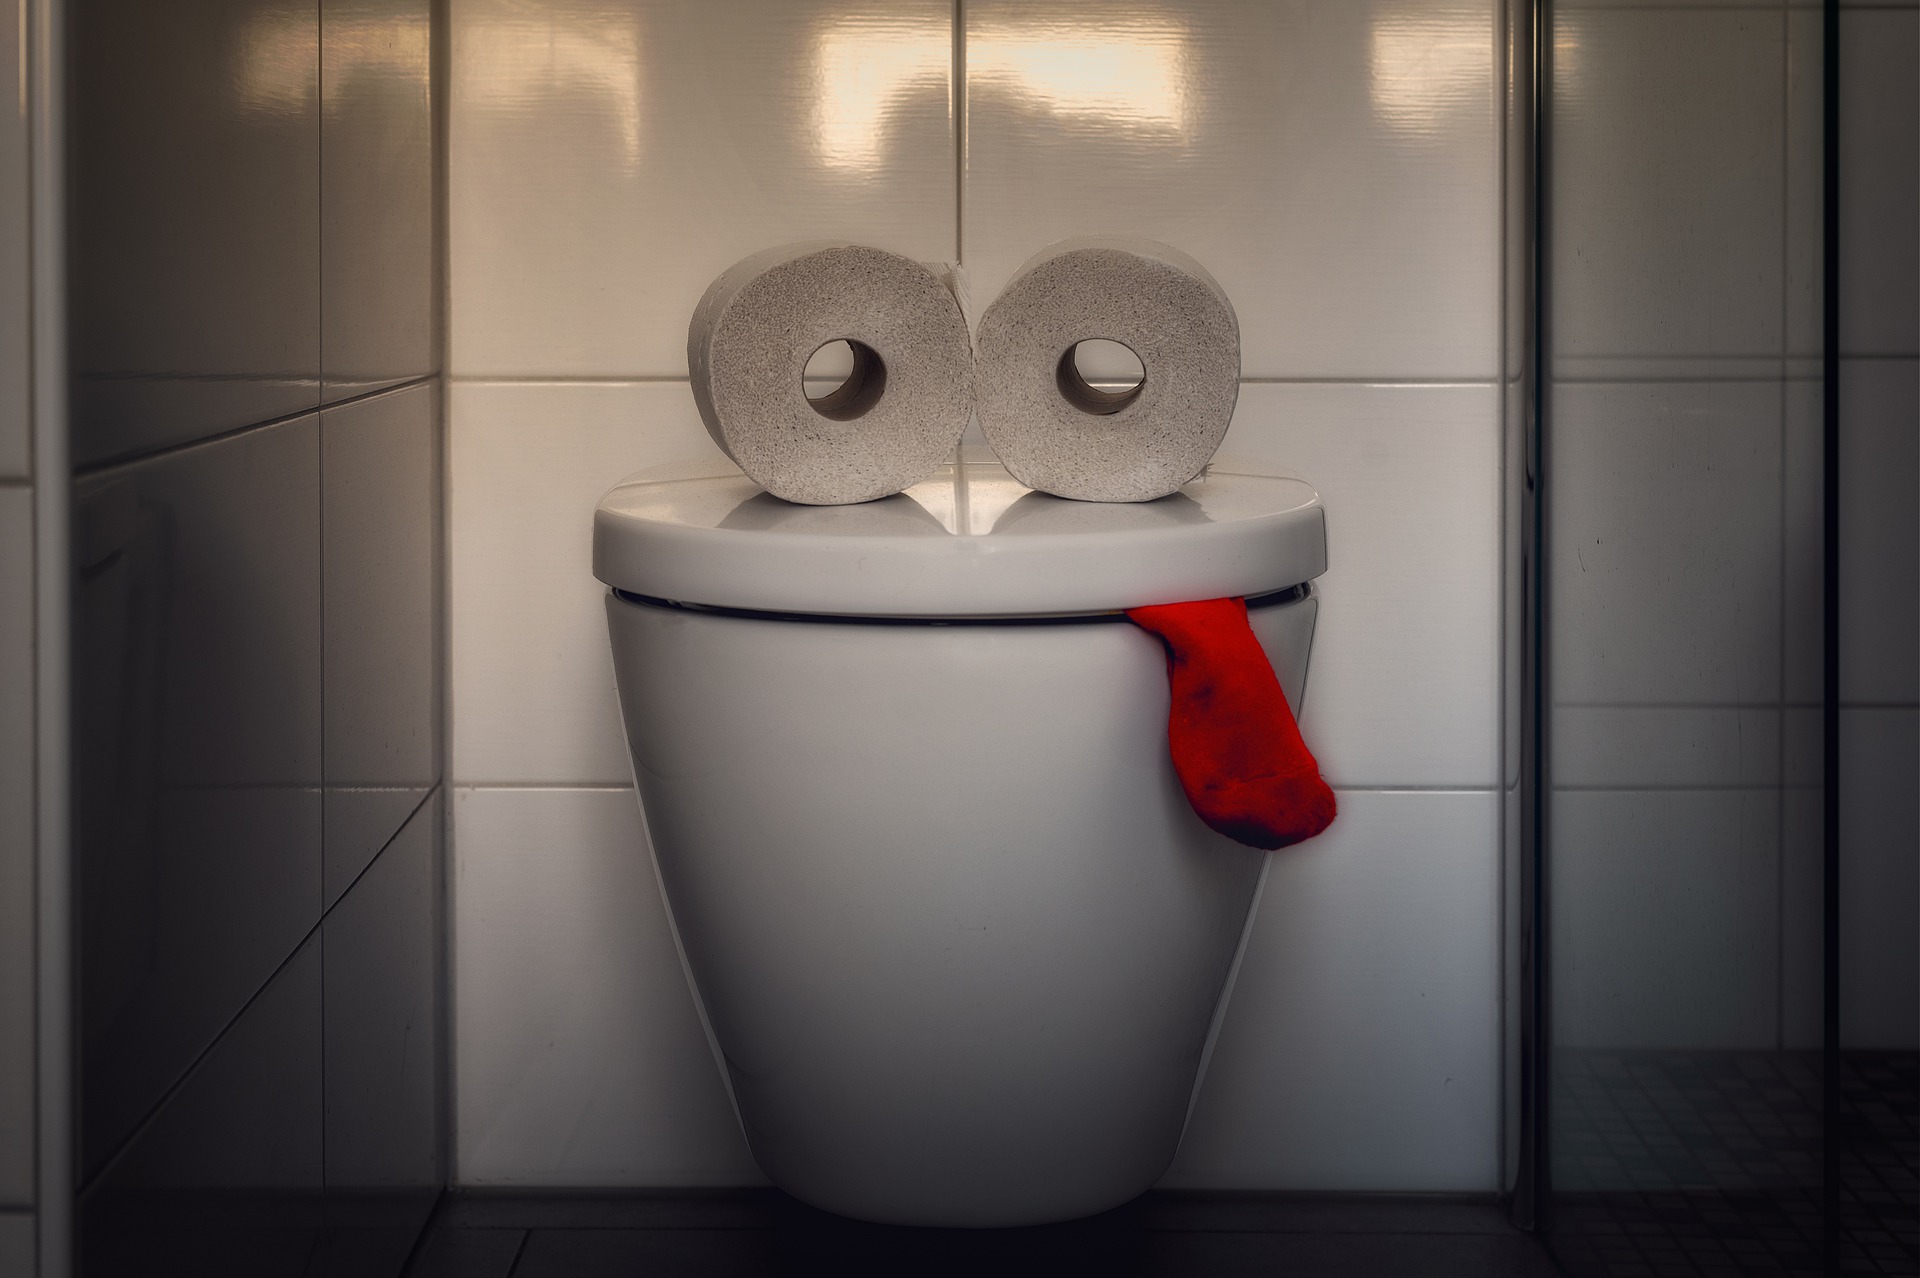 A toilet made to look like a face with the use of angled toilet rolls and a red sock